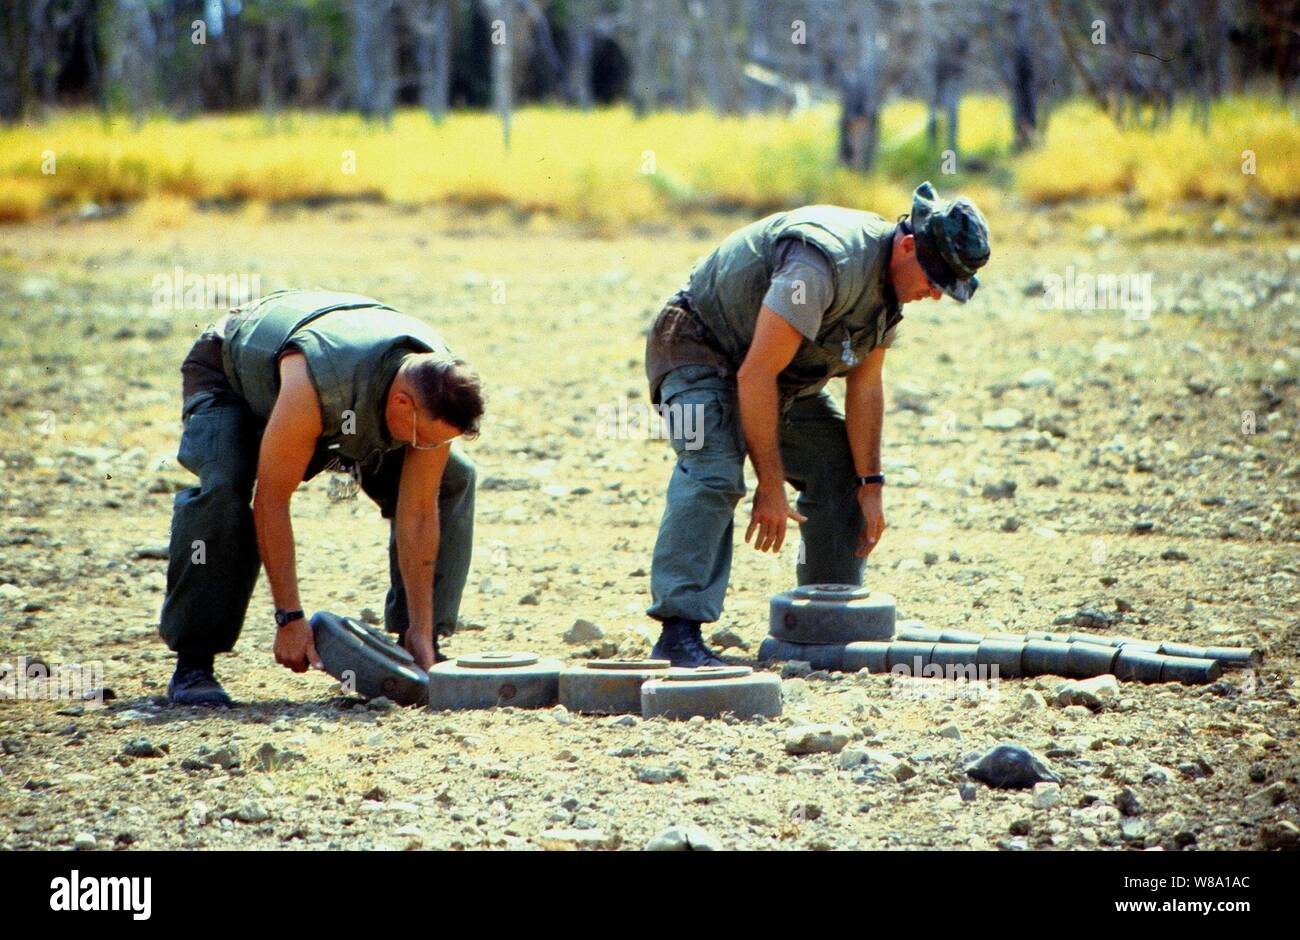 Marine Barracks Minefield Maintenance personnel stack deactivated anti-tank and anti-personnel land mines for destruction at a demolition site on Naval Station Guantanamo Bay, Cuba, in this July 10, 1997, file photo.  Anti-personnel and anti-tank land mines on the U.S. side of the fence separating Communist Cuba and the U.S. Naval Base at Guantanamo Bay are being removed in accordance with the Presidential Order of May 16, 1996.  Approximately 50,000 land mines were placed in the buffer zone between Communist Cuba and Guantanamo Bay beginning in 1961 as a result of the Cold War. The land mines Stock Photo